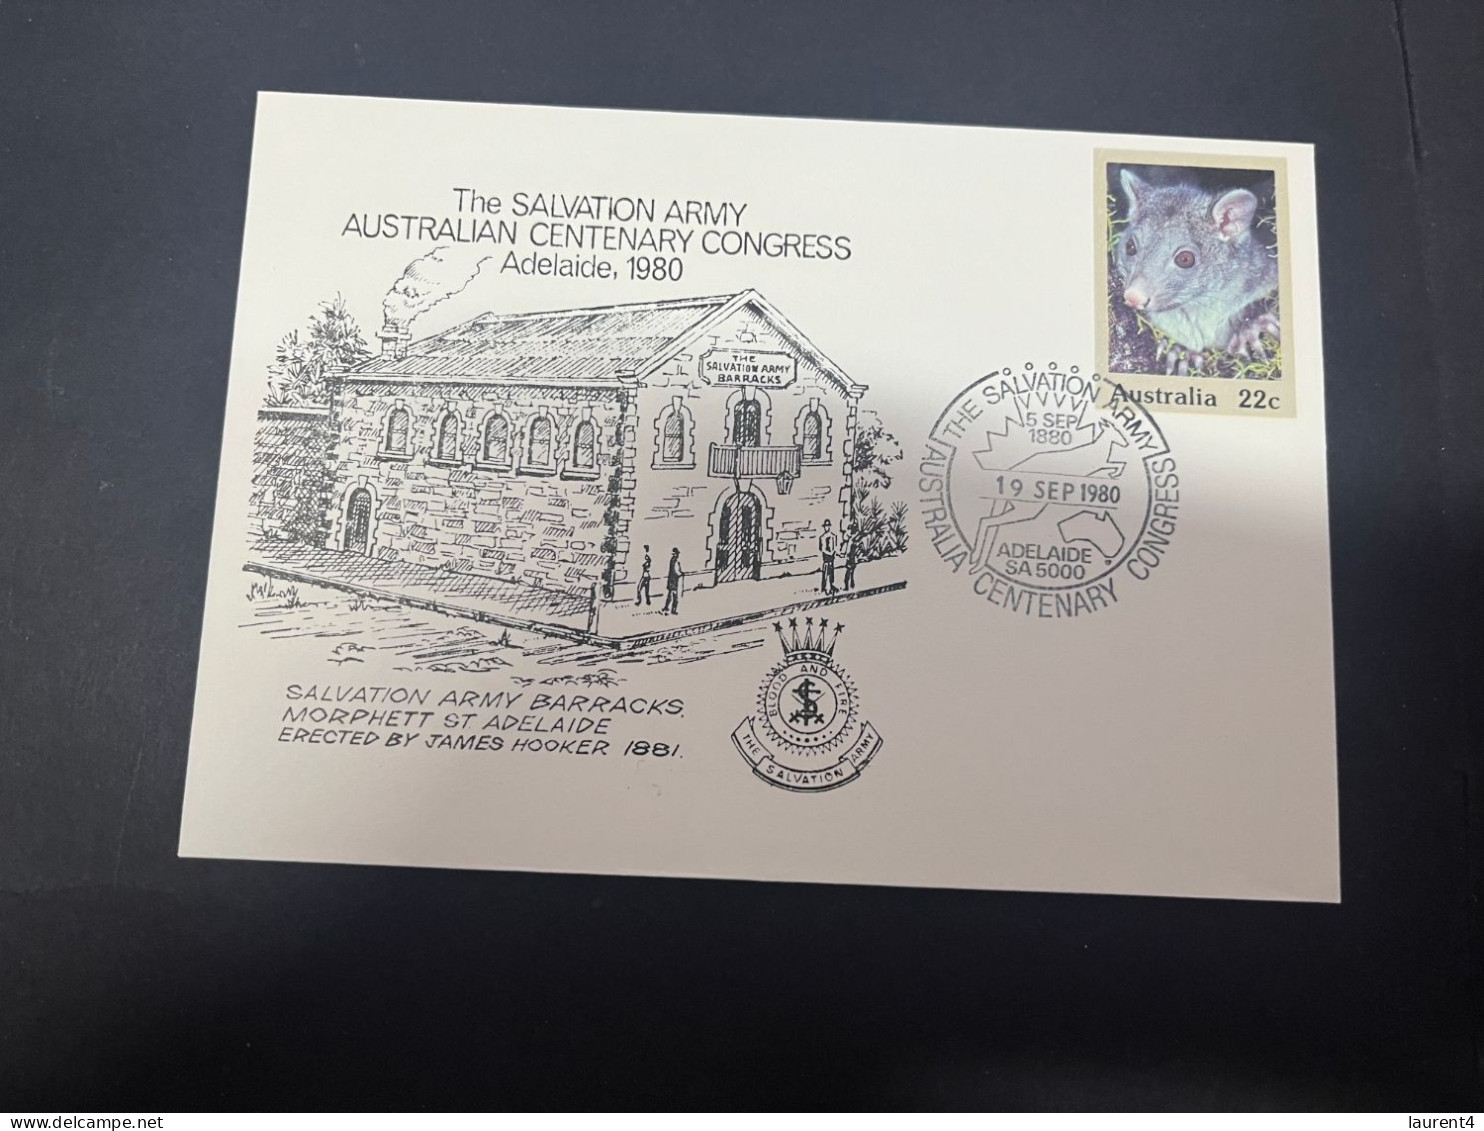 2-5-2024 (3 Z 39) Australia FDC (1 Covers) 1980 - Salvation Army Australian Centenary Congress In Adelaide (Brushtail) - Ersttagsbelege (FDC)